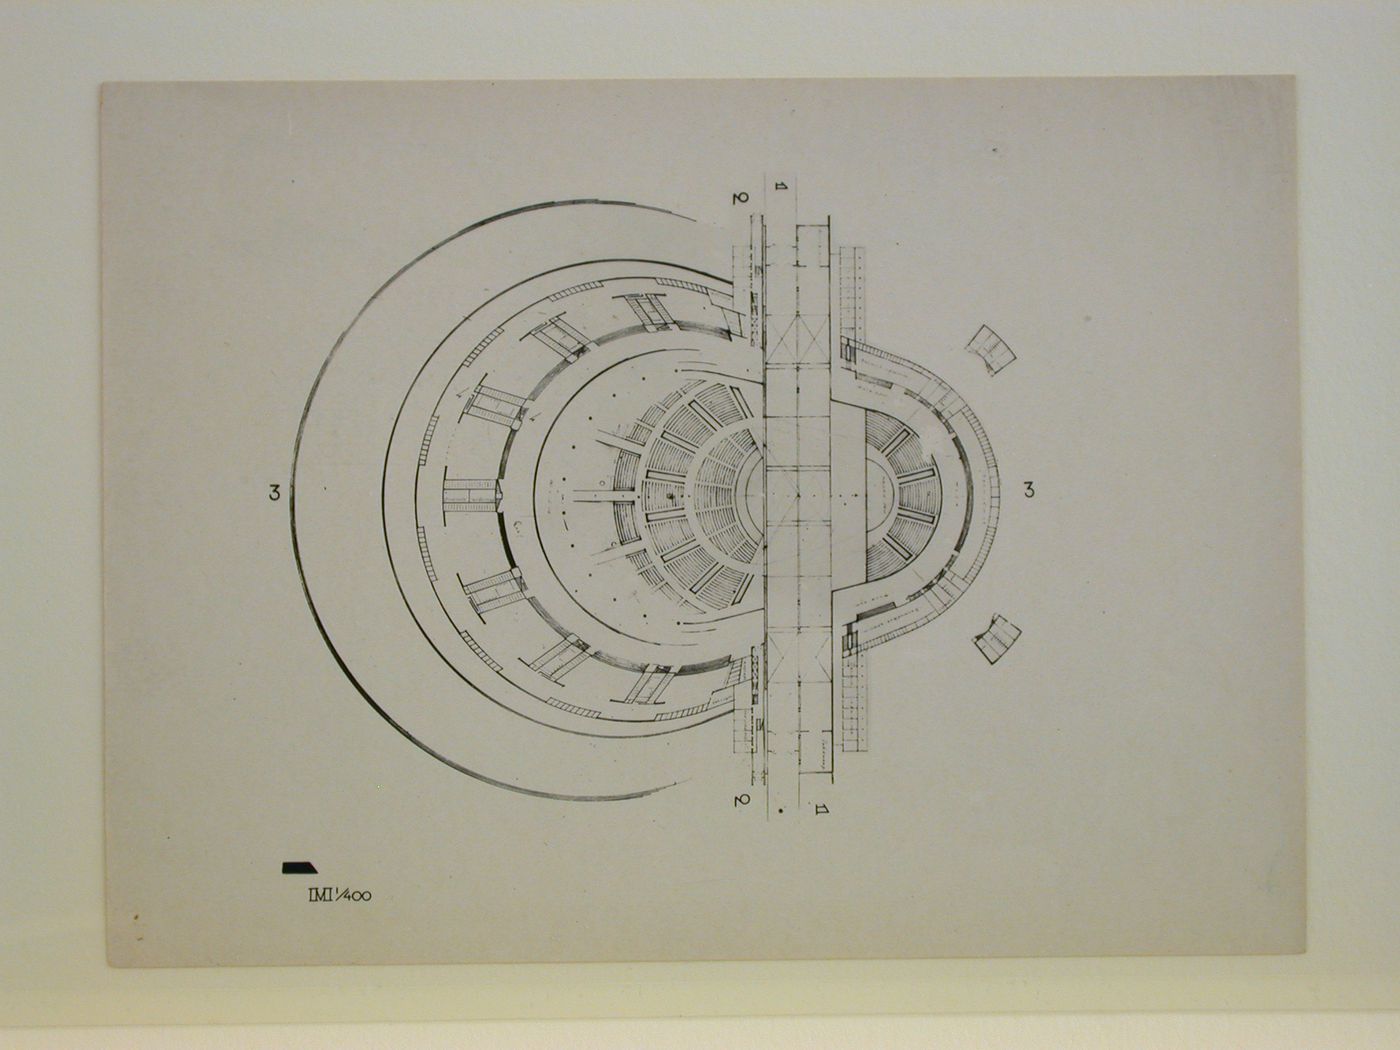 Photograph of plan for the first round of competition for a "synthetic theater" in Sverdlovsk, Soviet Union (now Ekaterinburg, Russia)